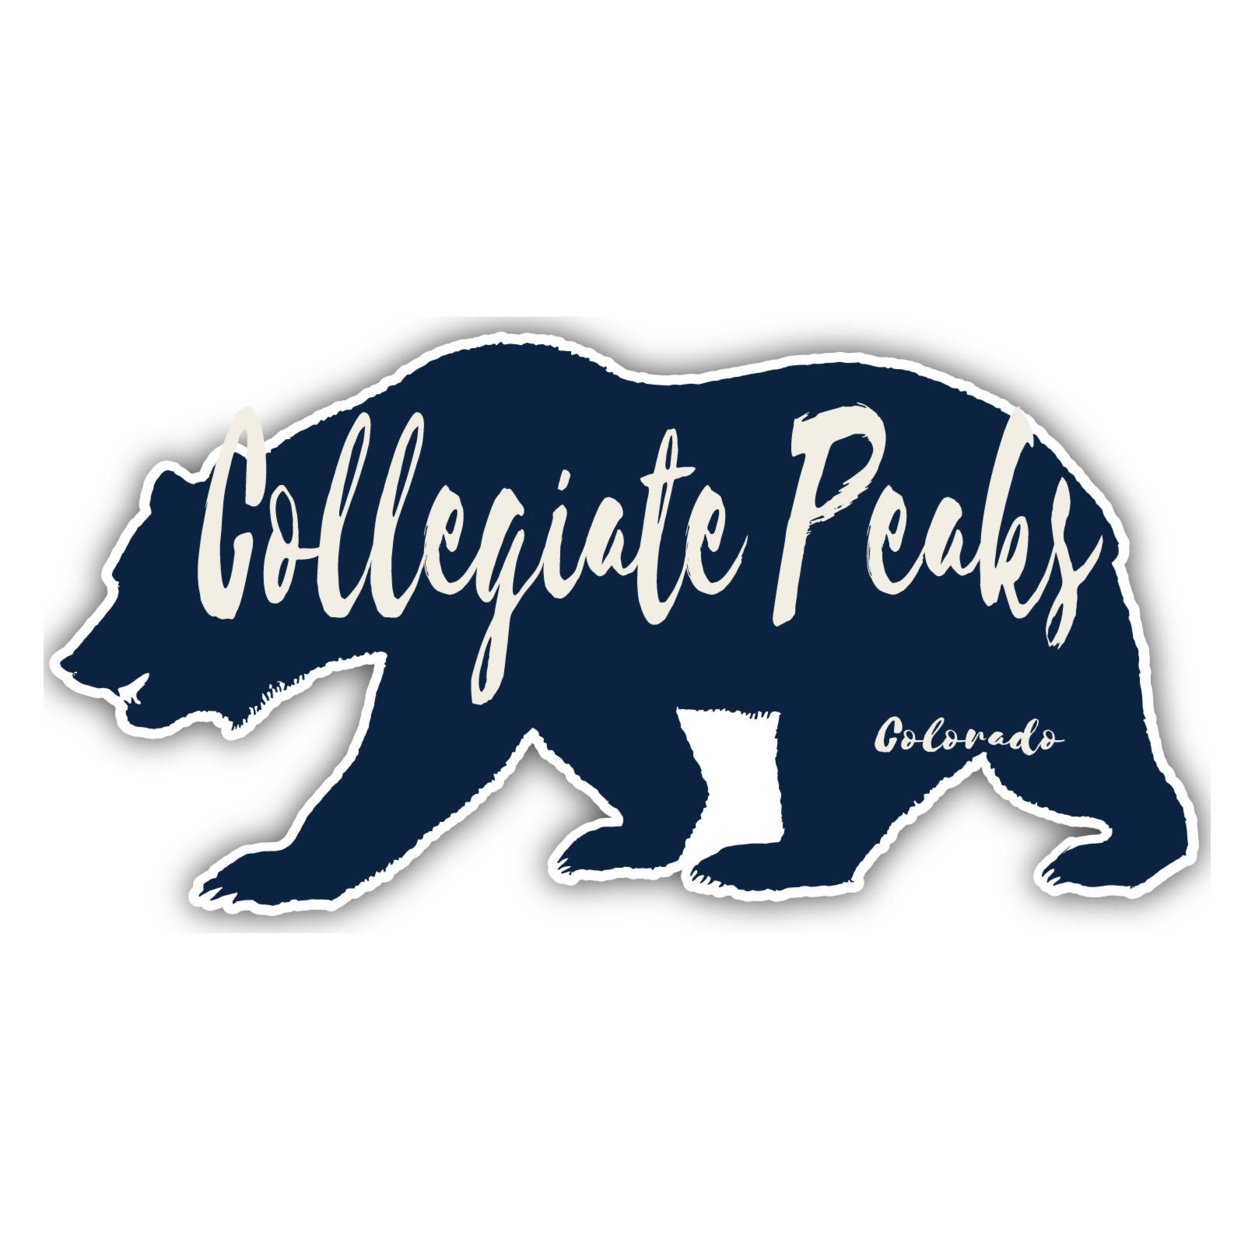 Collegiate Peaks Colorado Souvenir Decorative Stickers (Choose Theme And Size) - 4-Pack, 6-Inch, Camp Life